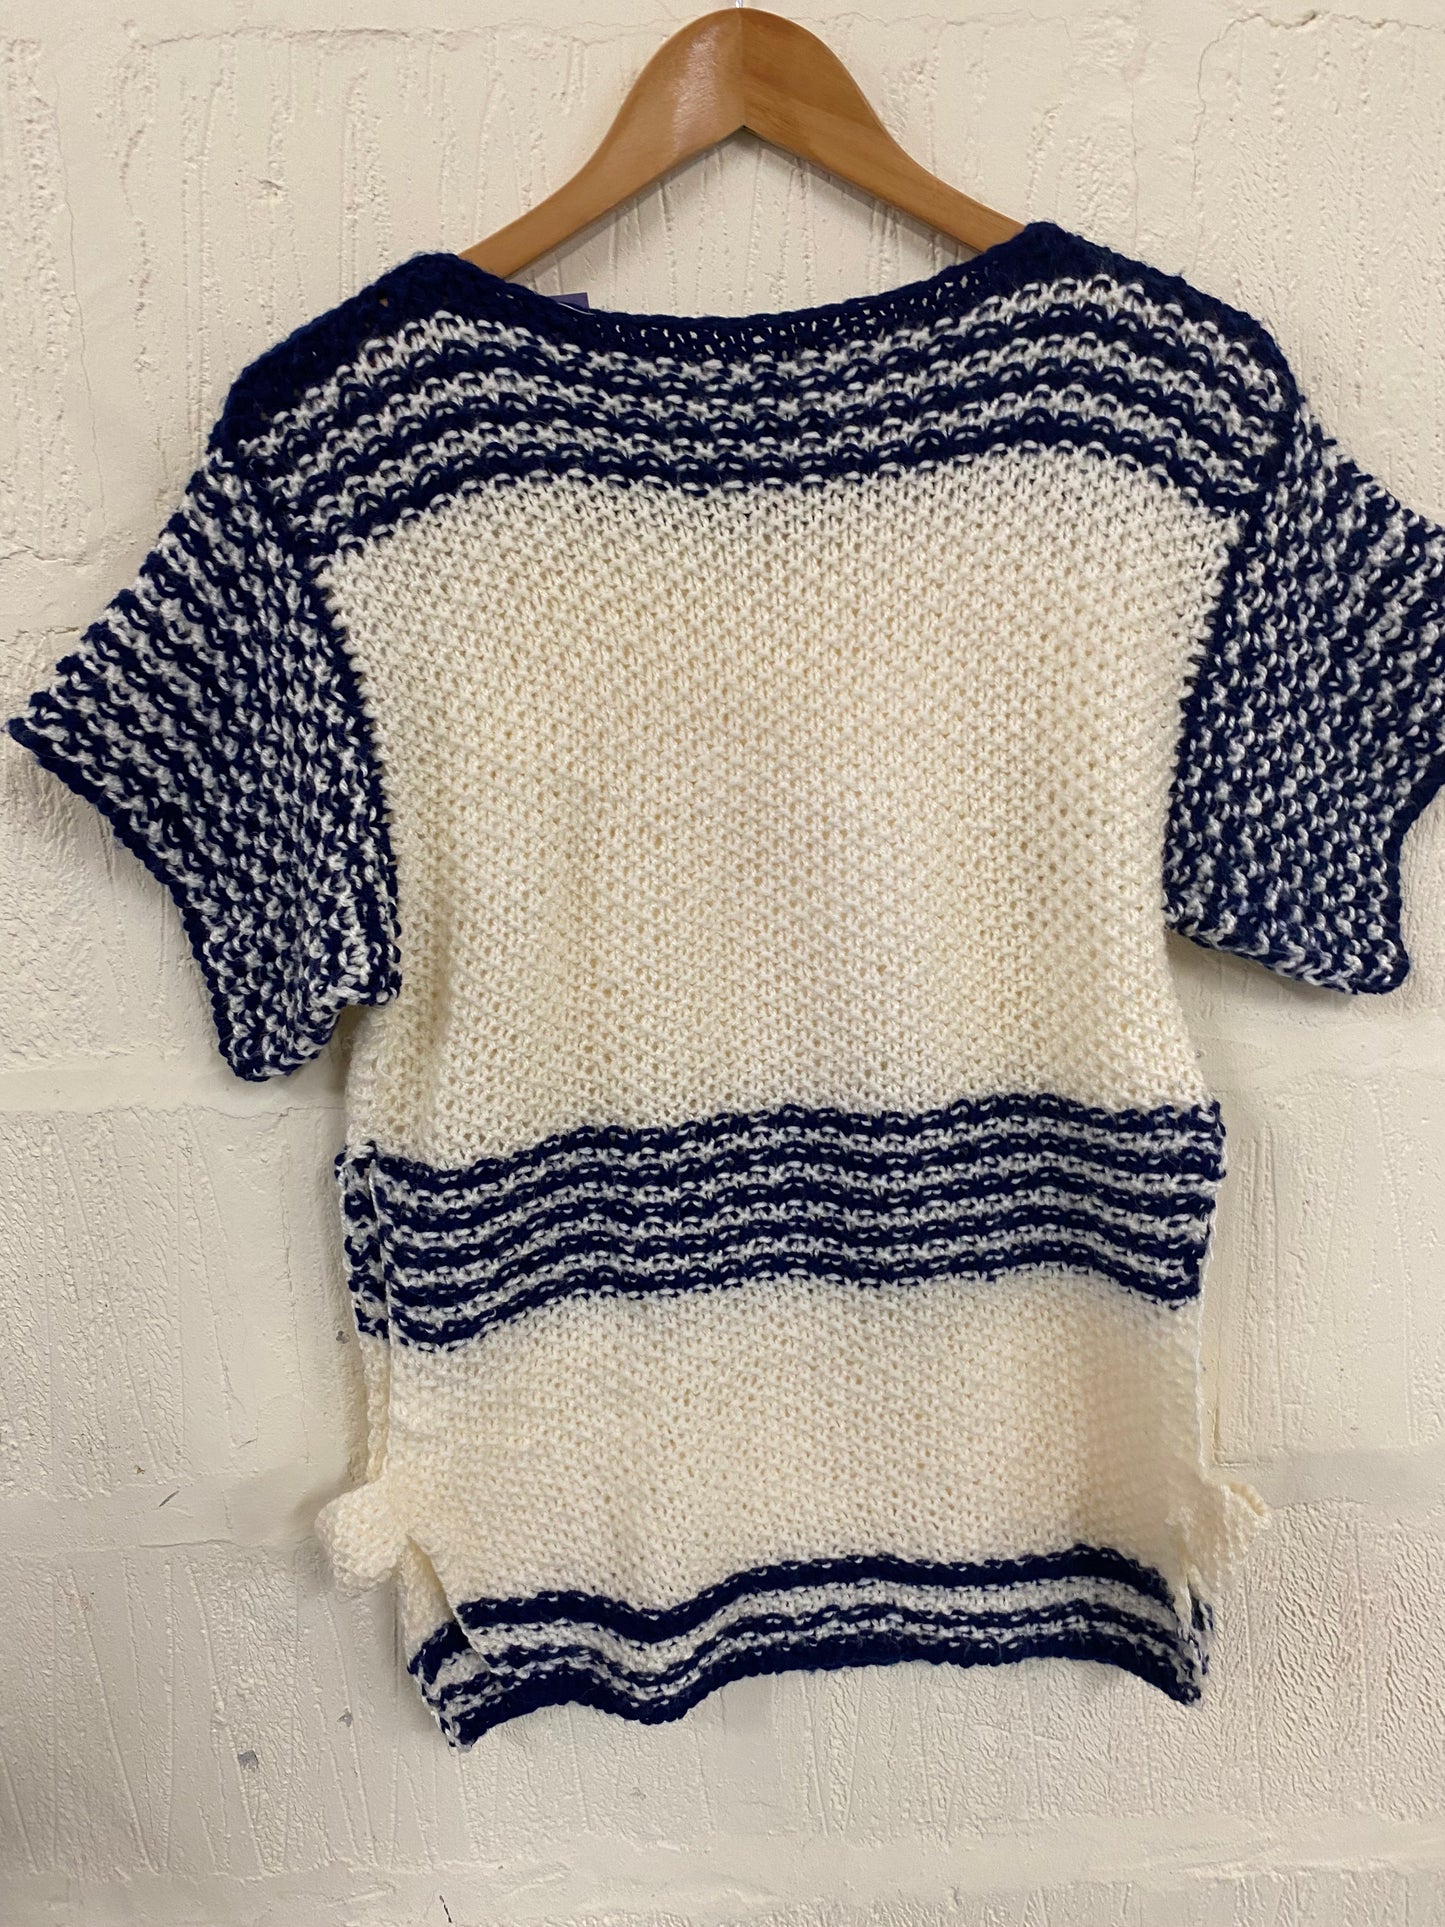 Hand Knitted Short Sleeve Navy  Striped Jumper  Size 12